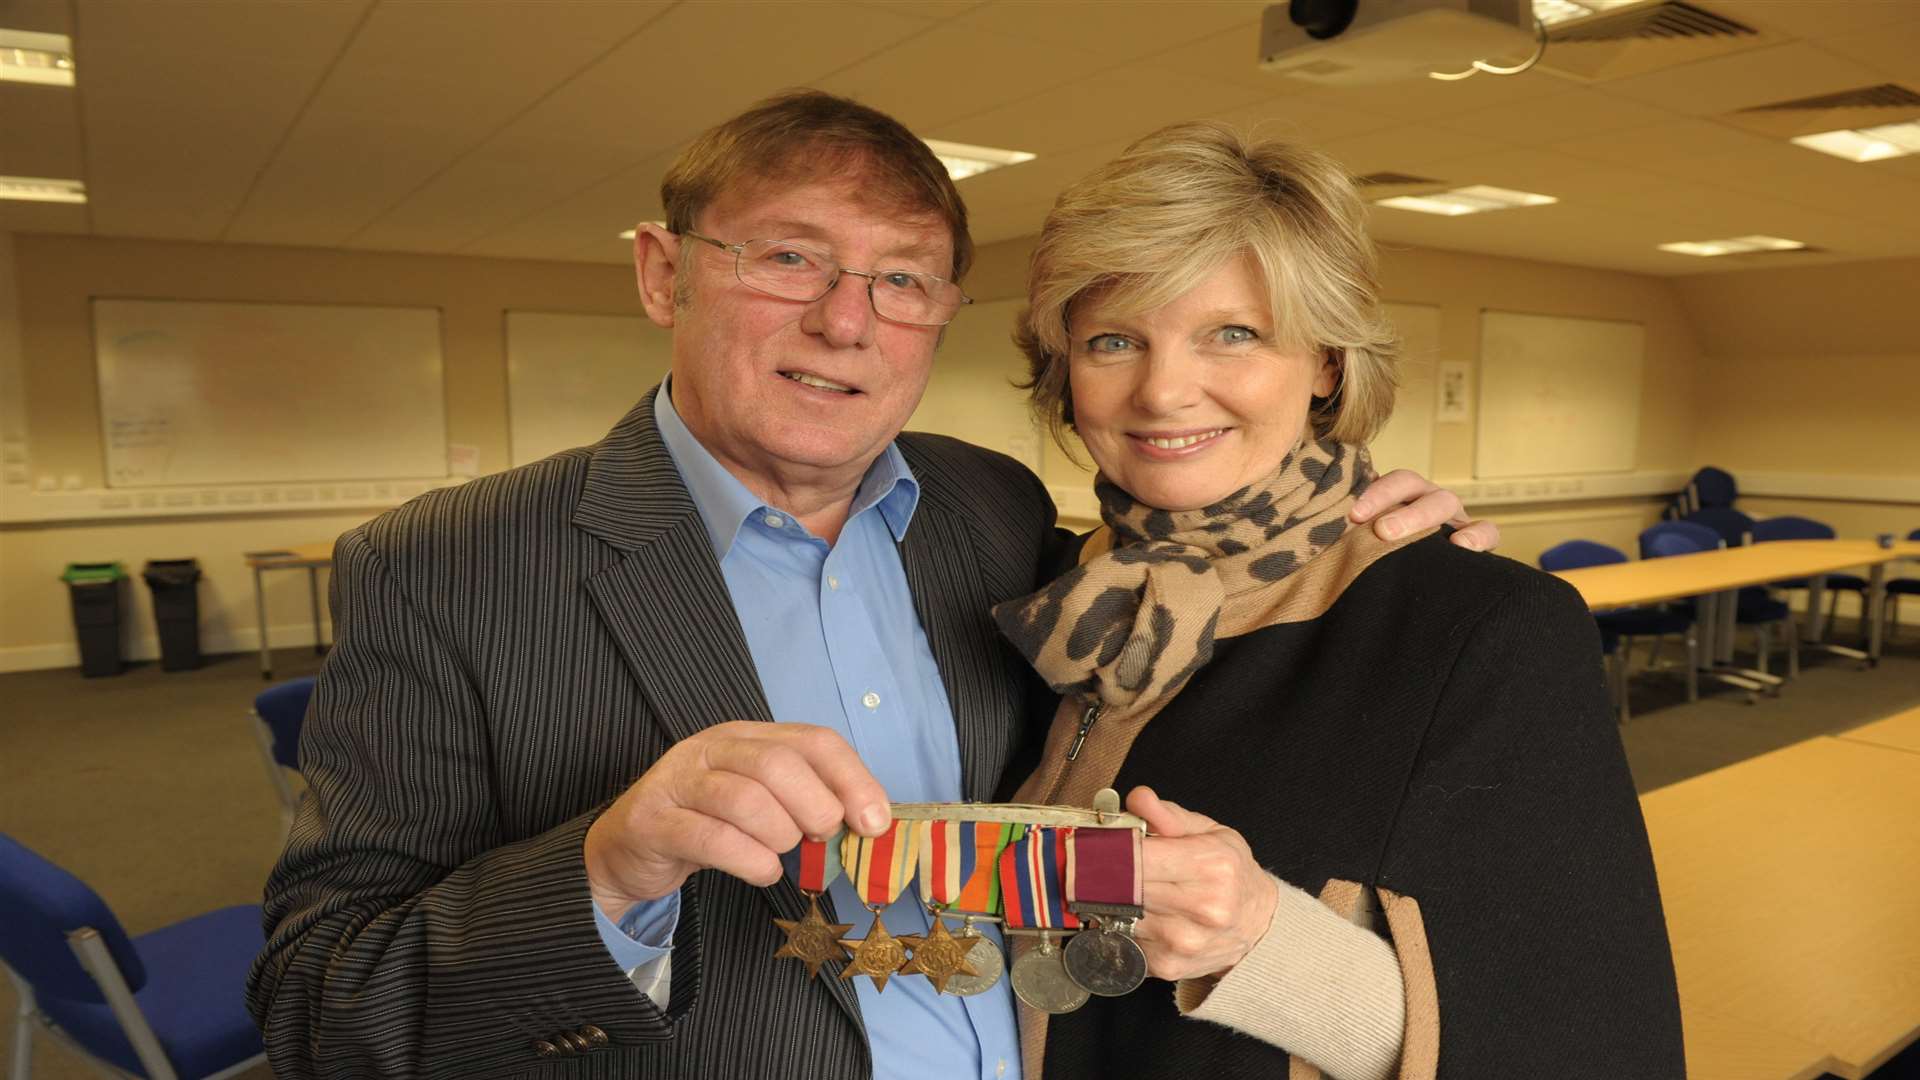 Leonard and Anne Hazeldine were reunited with the medals. Picture by Steve Crispe.